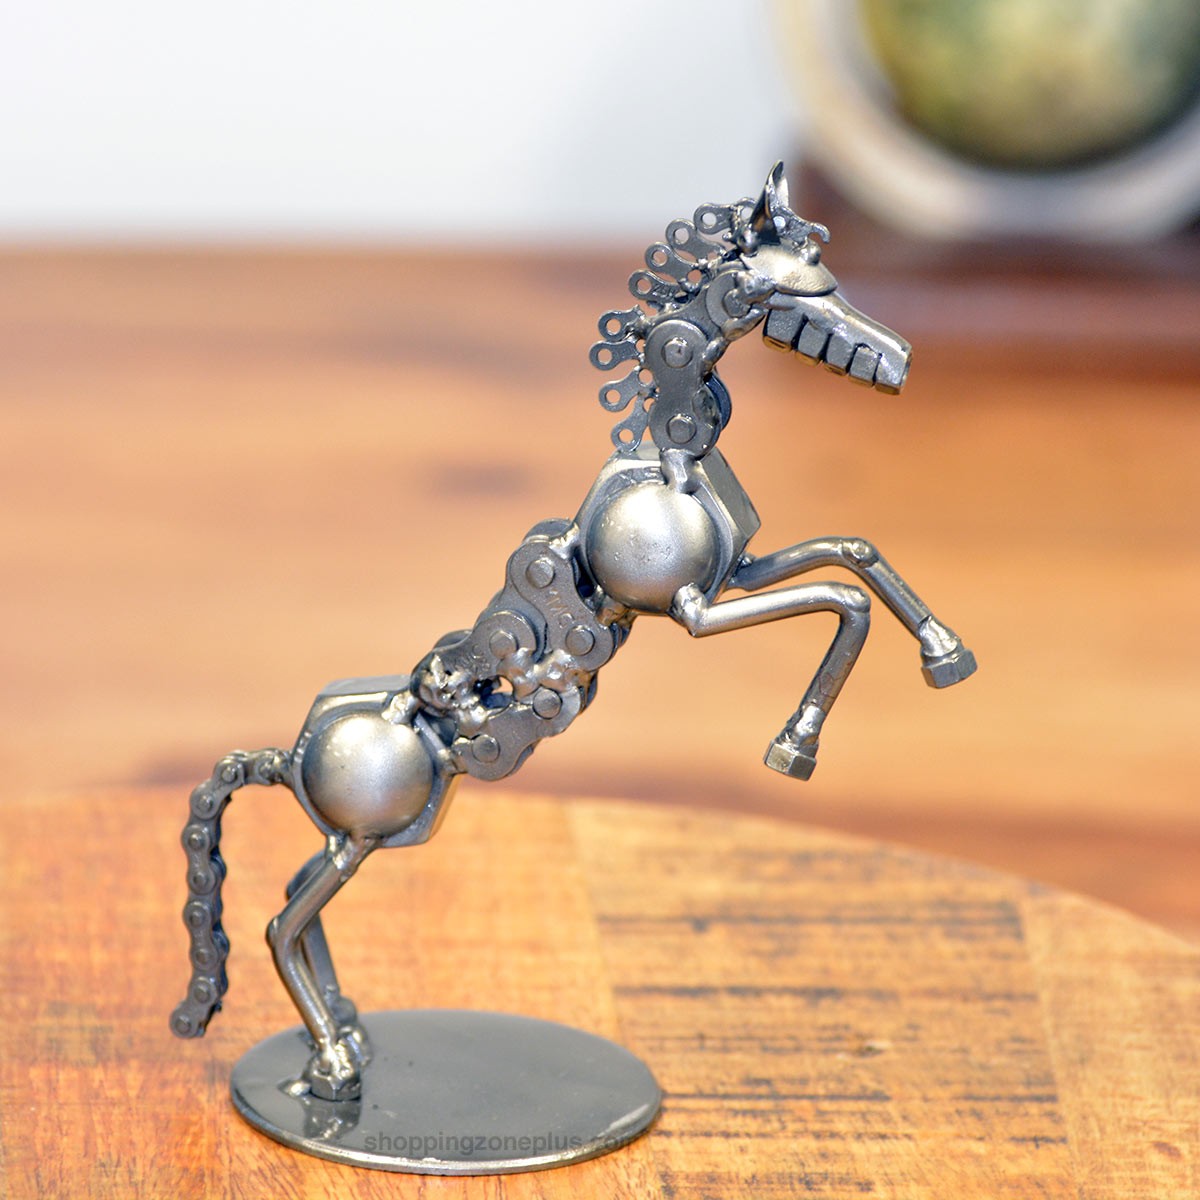 Horse Rearing, Horse Trotting - Recycled Metal Sculpture ...